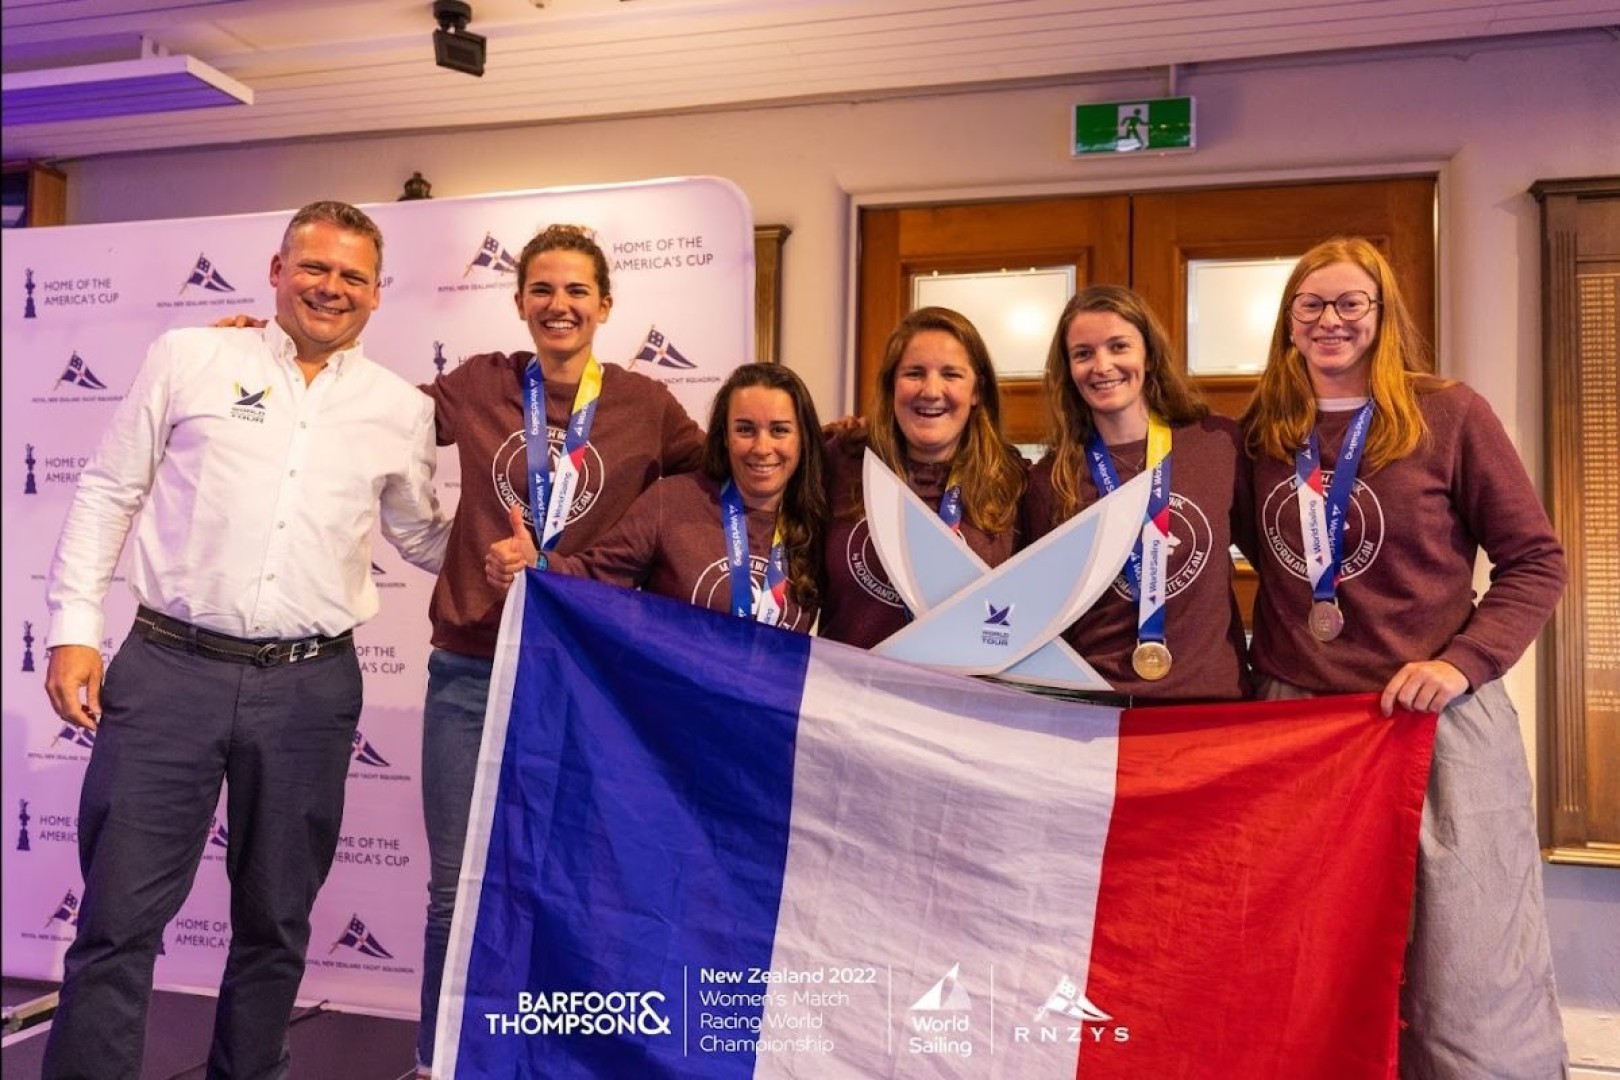 Pauline Courtois and Match in Pink - Overall winners of the 2022 Women's World Match Racing Tour Photo: Live Sail Die